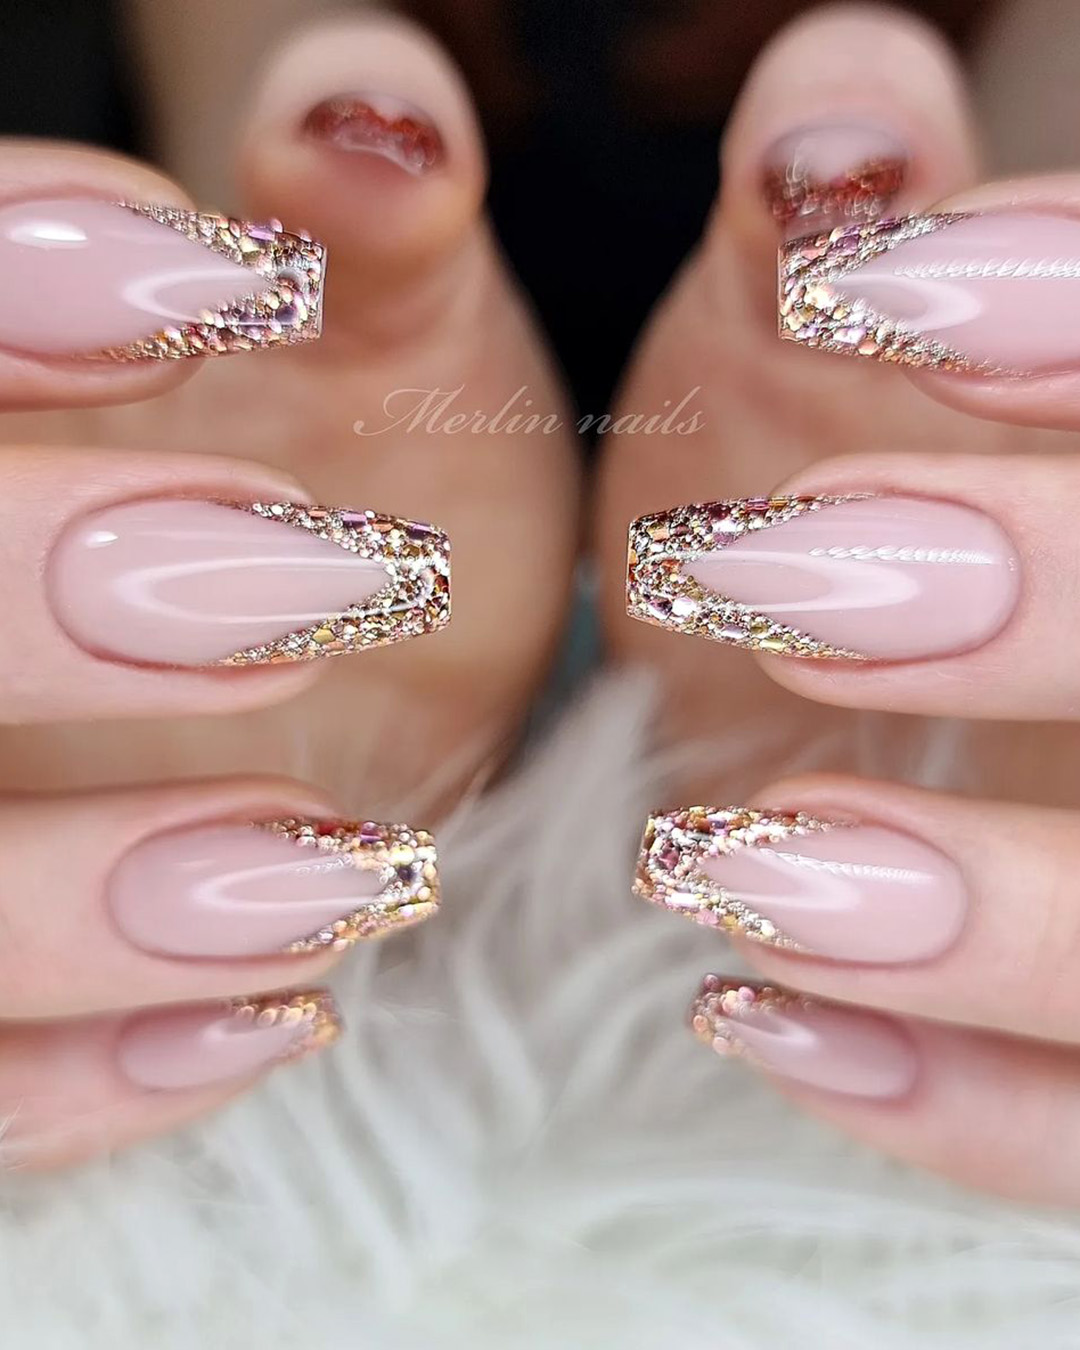 coffin wedding nails pink french with glitter merlin_nails